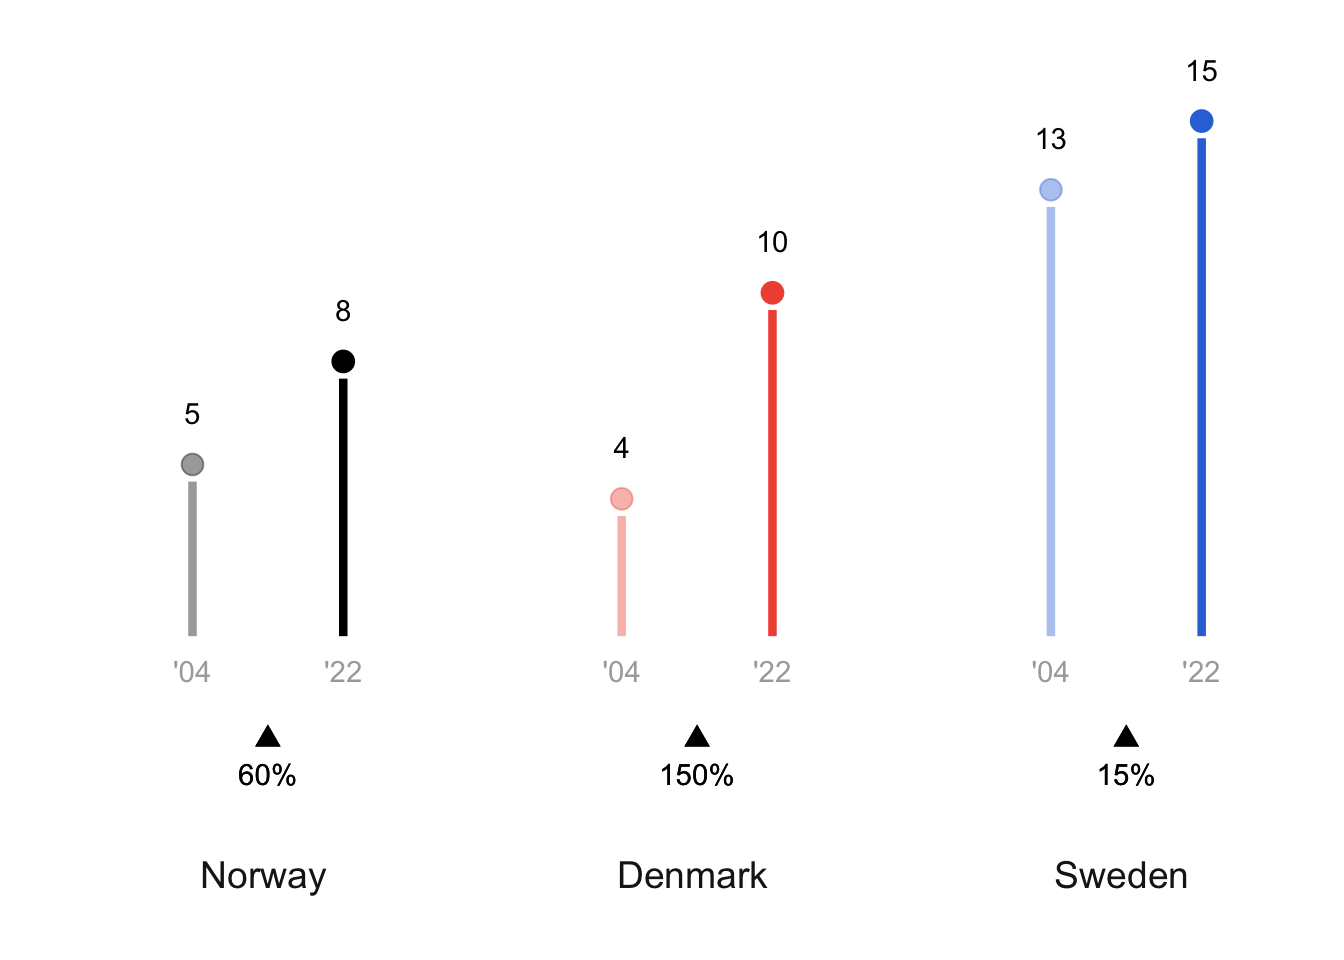 A lollipop graph showing the number of World Heritage Sites in Norway, Denmark, and Sweden across 2004 to 2022. Norway has the fewest sites, then Denmark, then Sweden.  The number of sites increased for all countries across 2004 to 2022